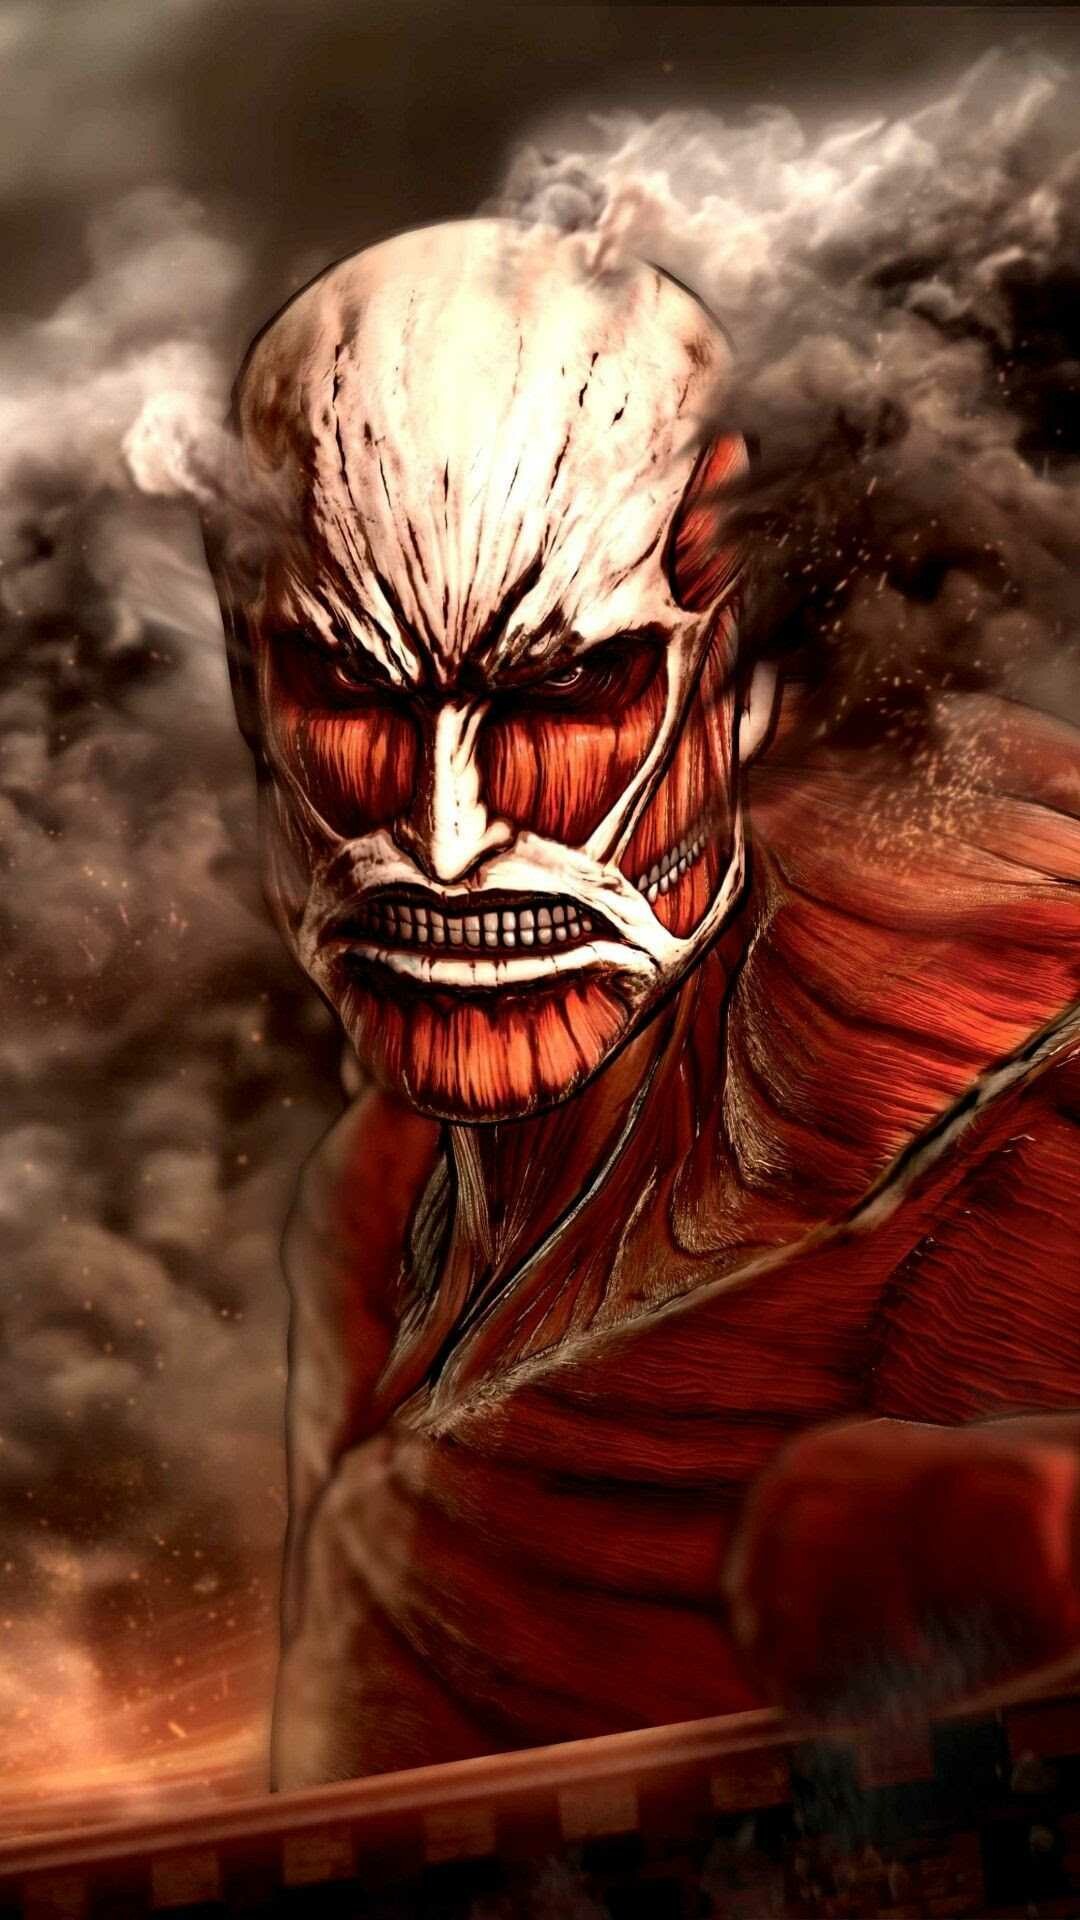 Attack on Titan (TV Series): The series, based on the manga of the same name, Humanity facing off against terrifying giants. 1080x1920 Full HD Wallpaper.